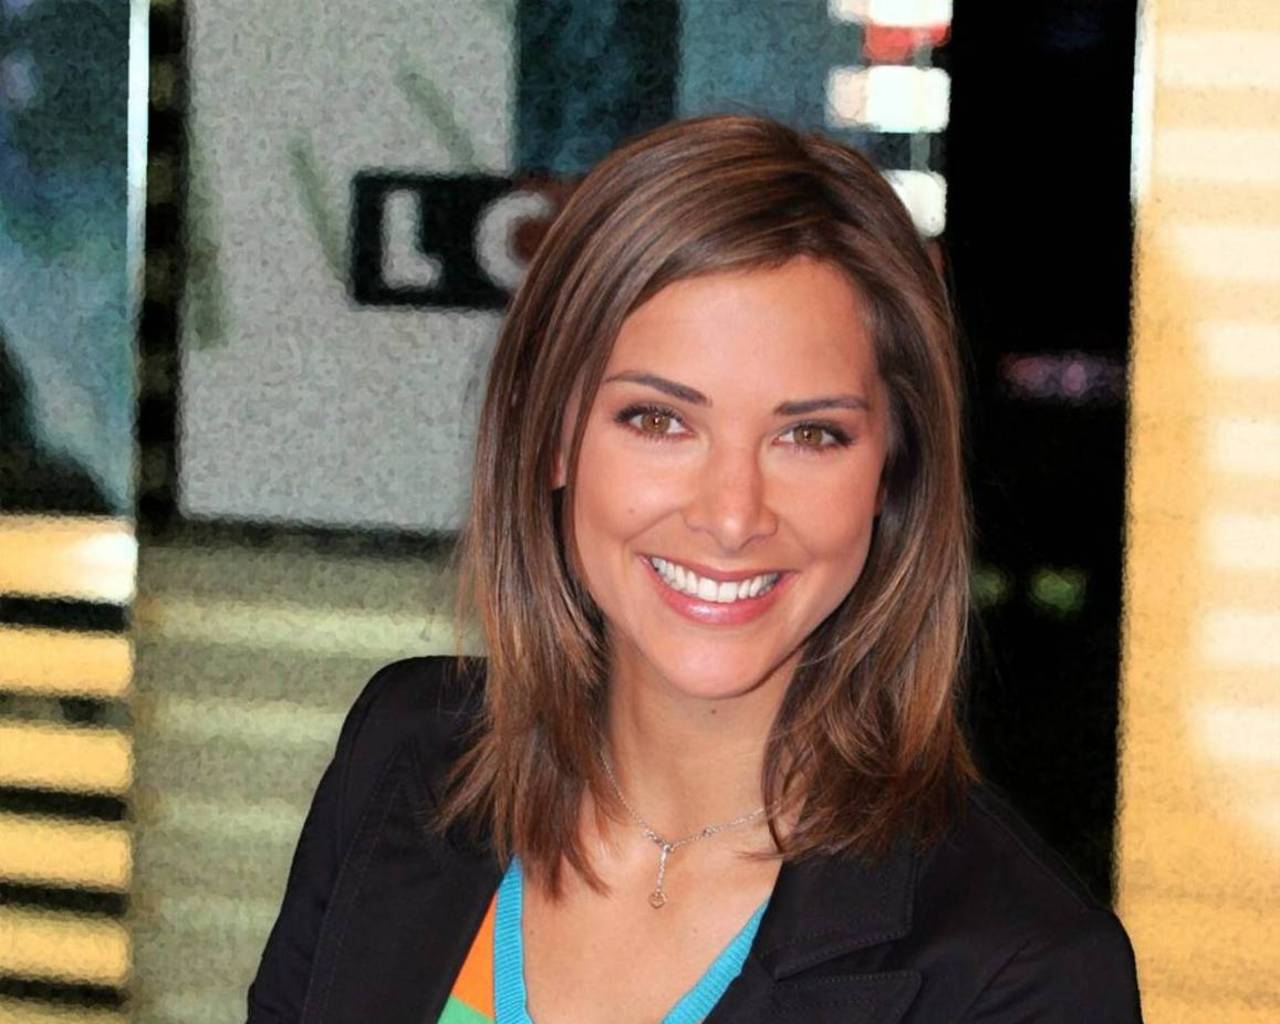 15 Hottest News Anchors in The World 2022